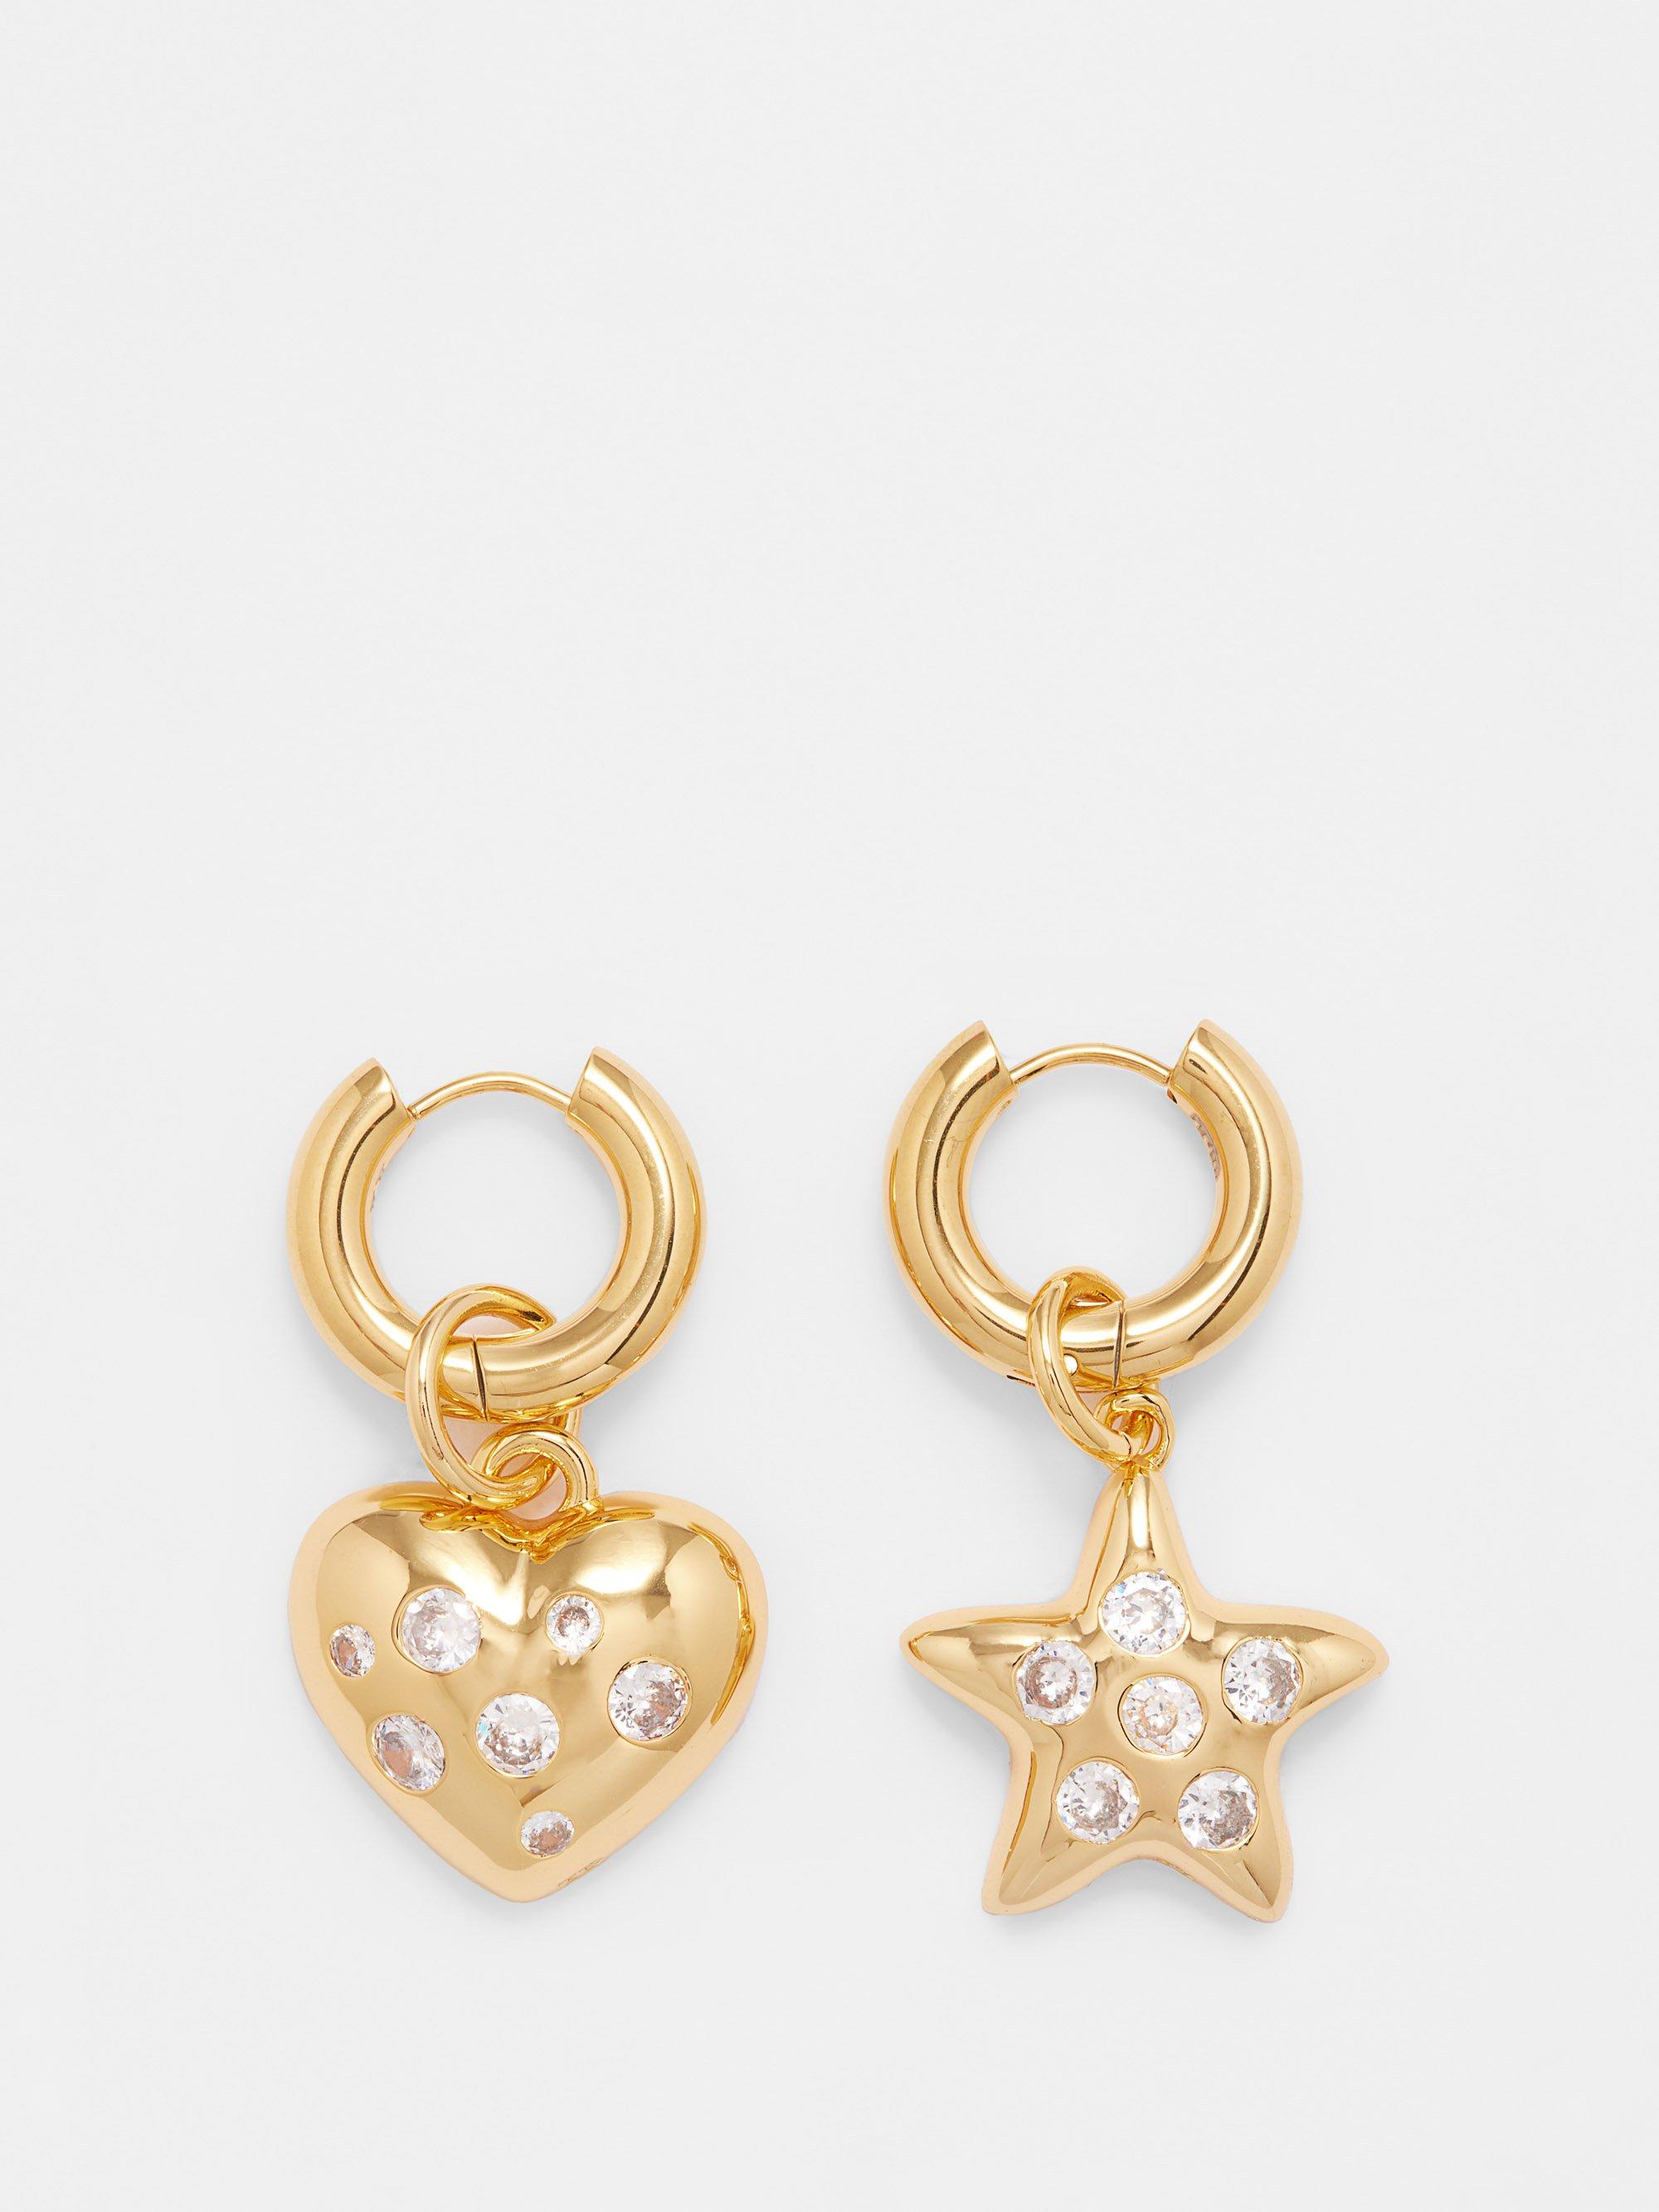 Dior, Jewelry, Christian Dior Star Drop Ear Cuff Earrings Metal With  Crystals And Faux Pearls